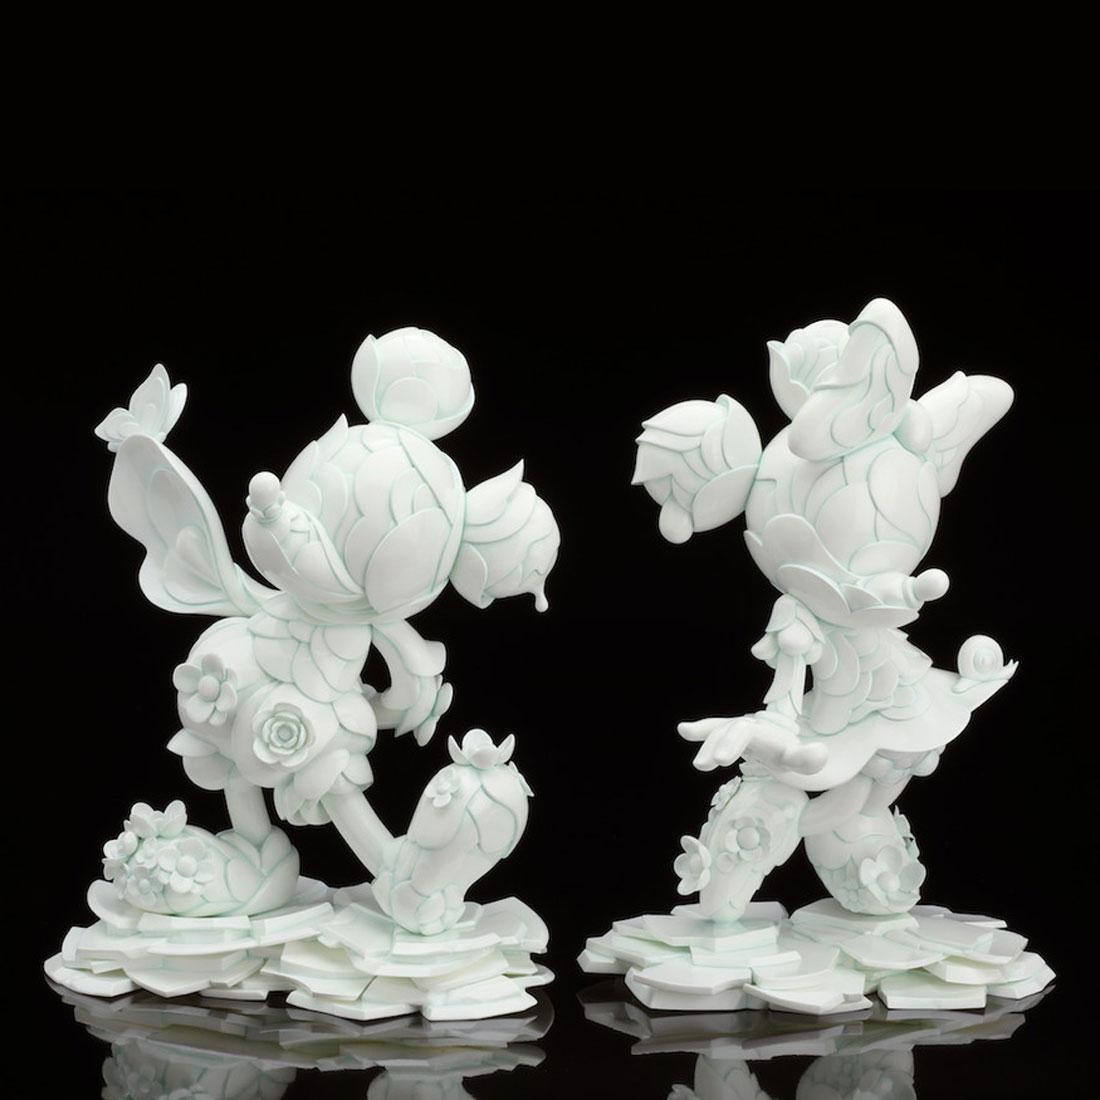 James Jean x Good Smile Company Mickey Mouse And Minnie Mouse 90th Anniversary Edition Sculpture Set (white)